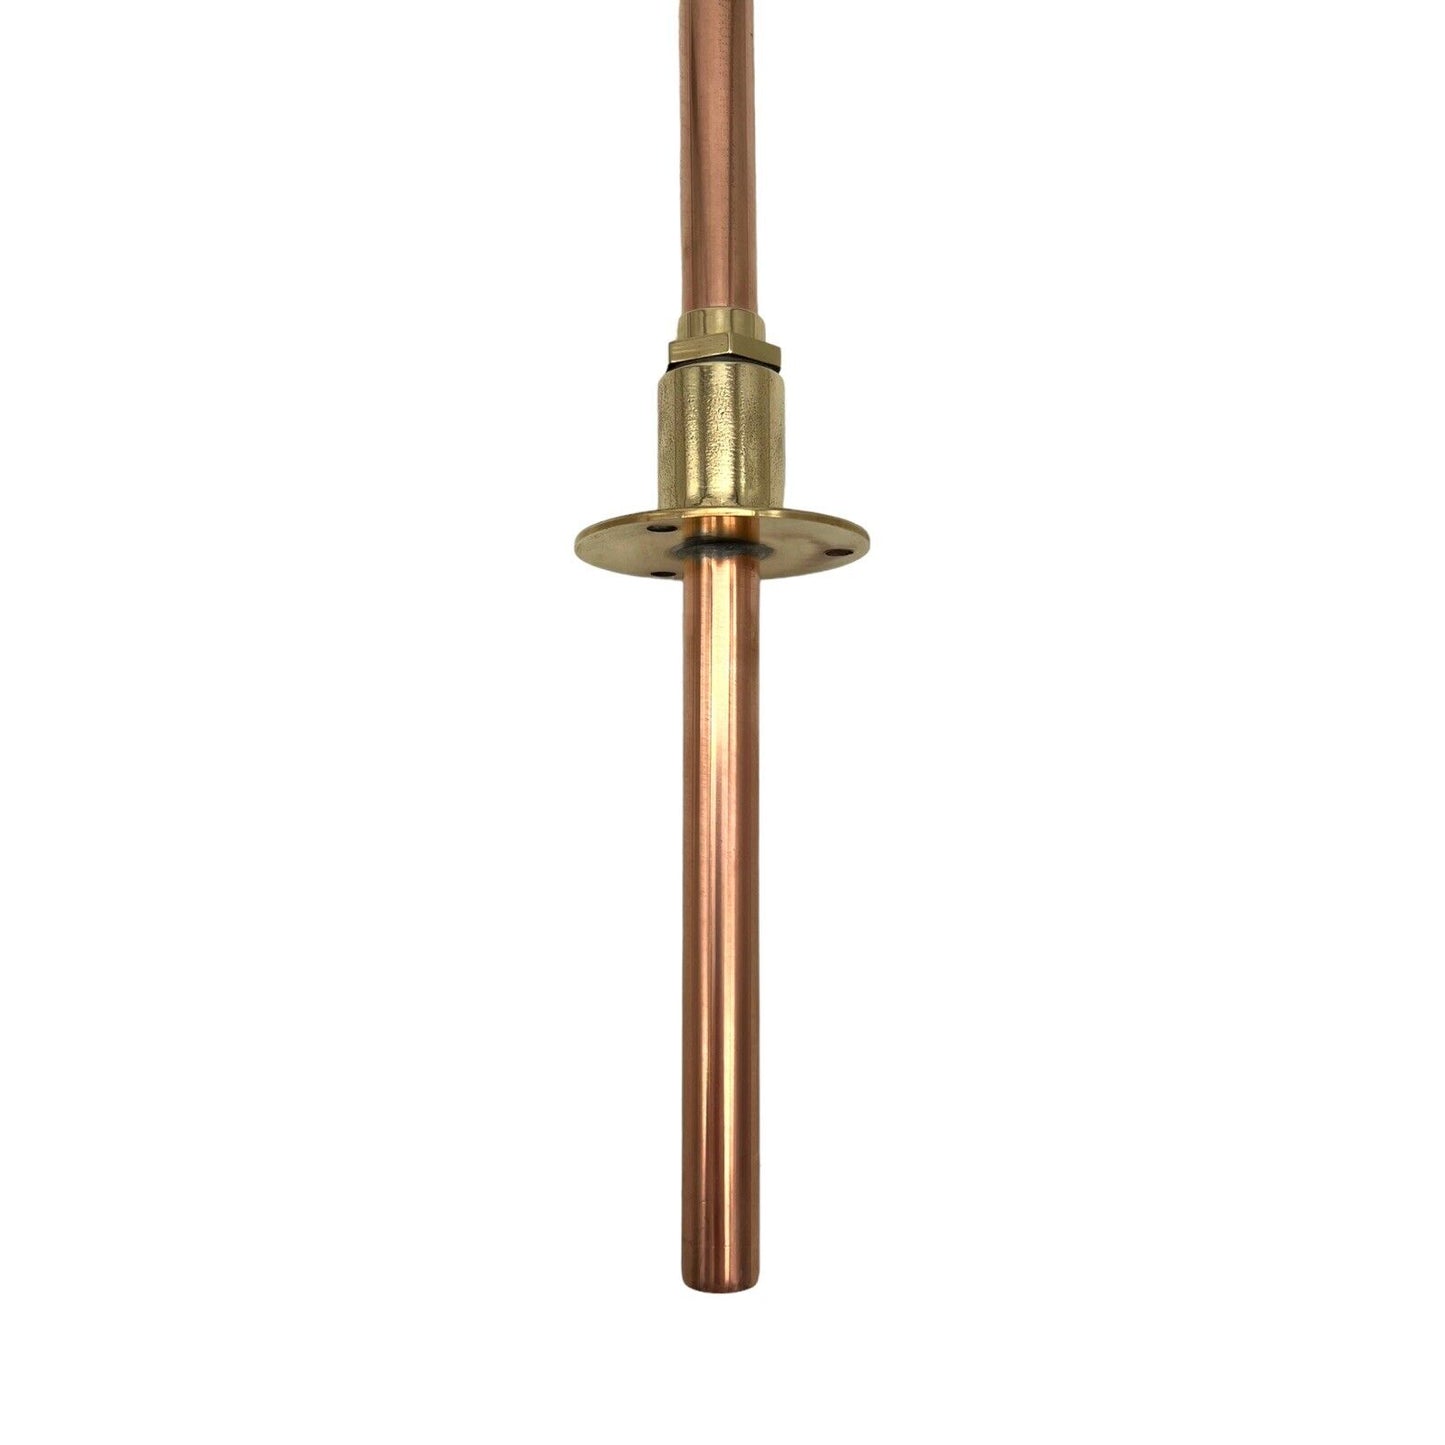 Copper and brass handmade bathroom or kitchen tap